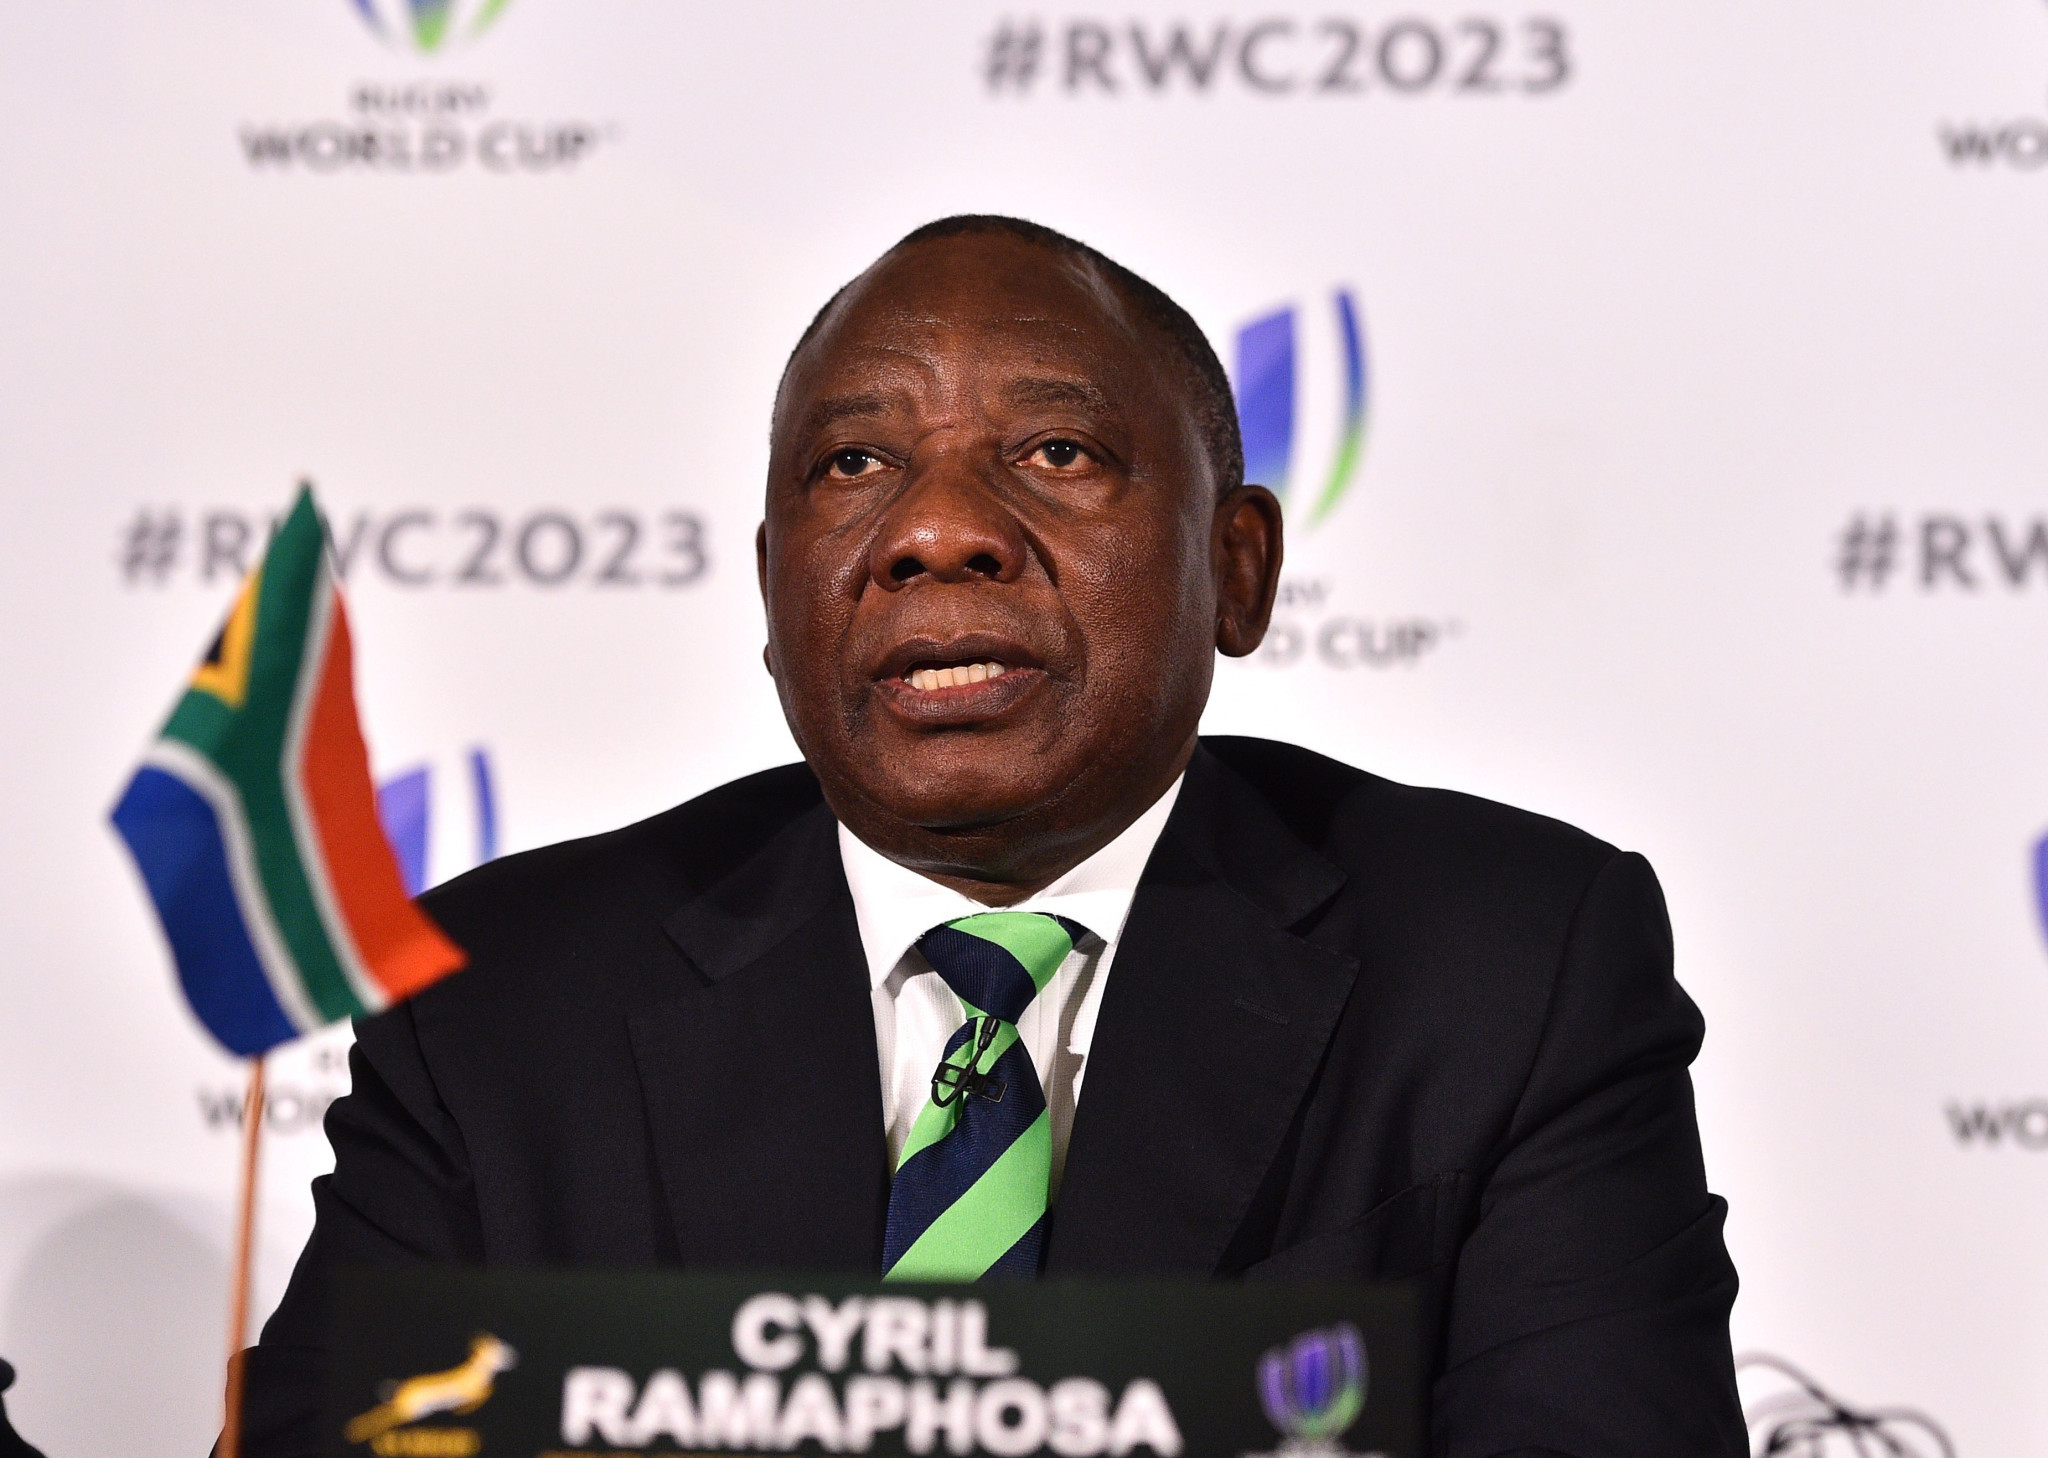 Countries bidding for 2023 Rugby World Cup make presentations